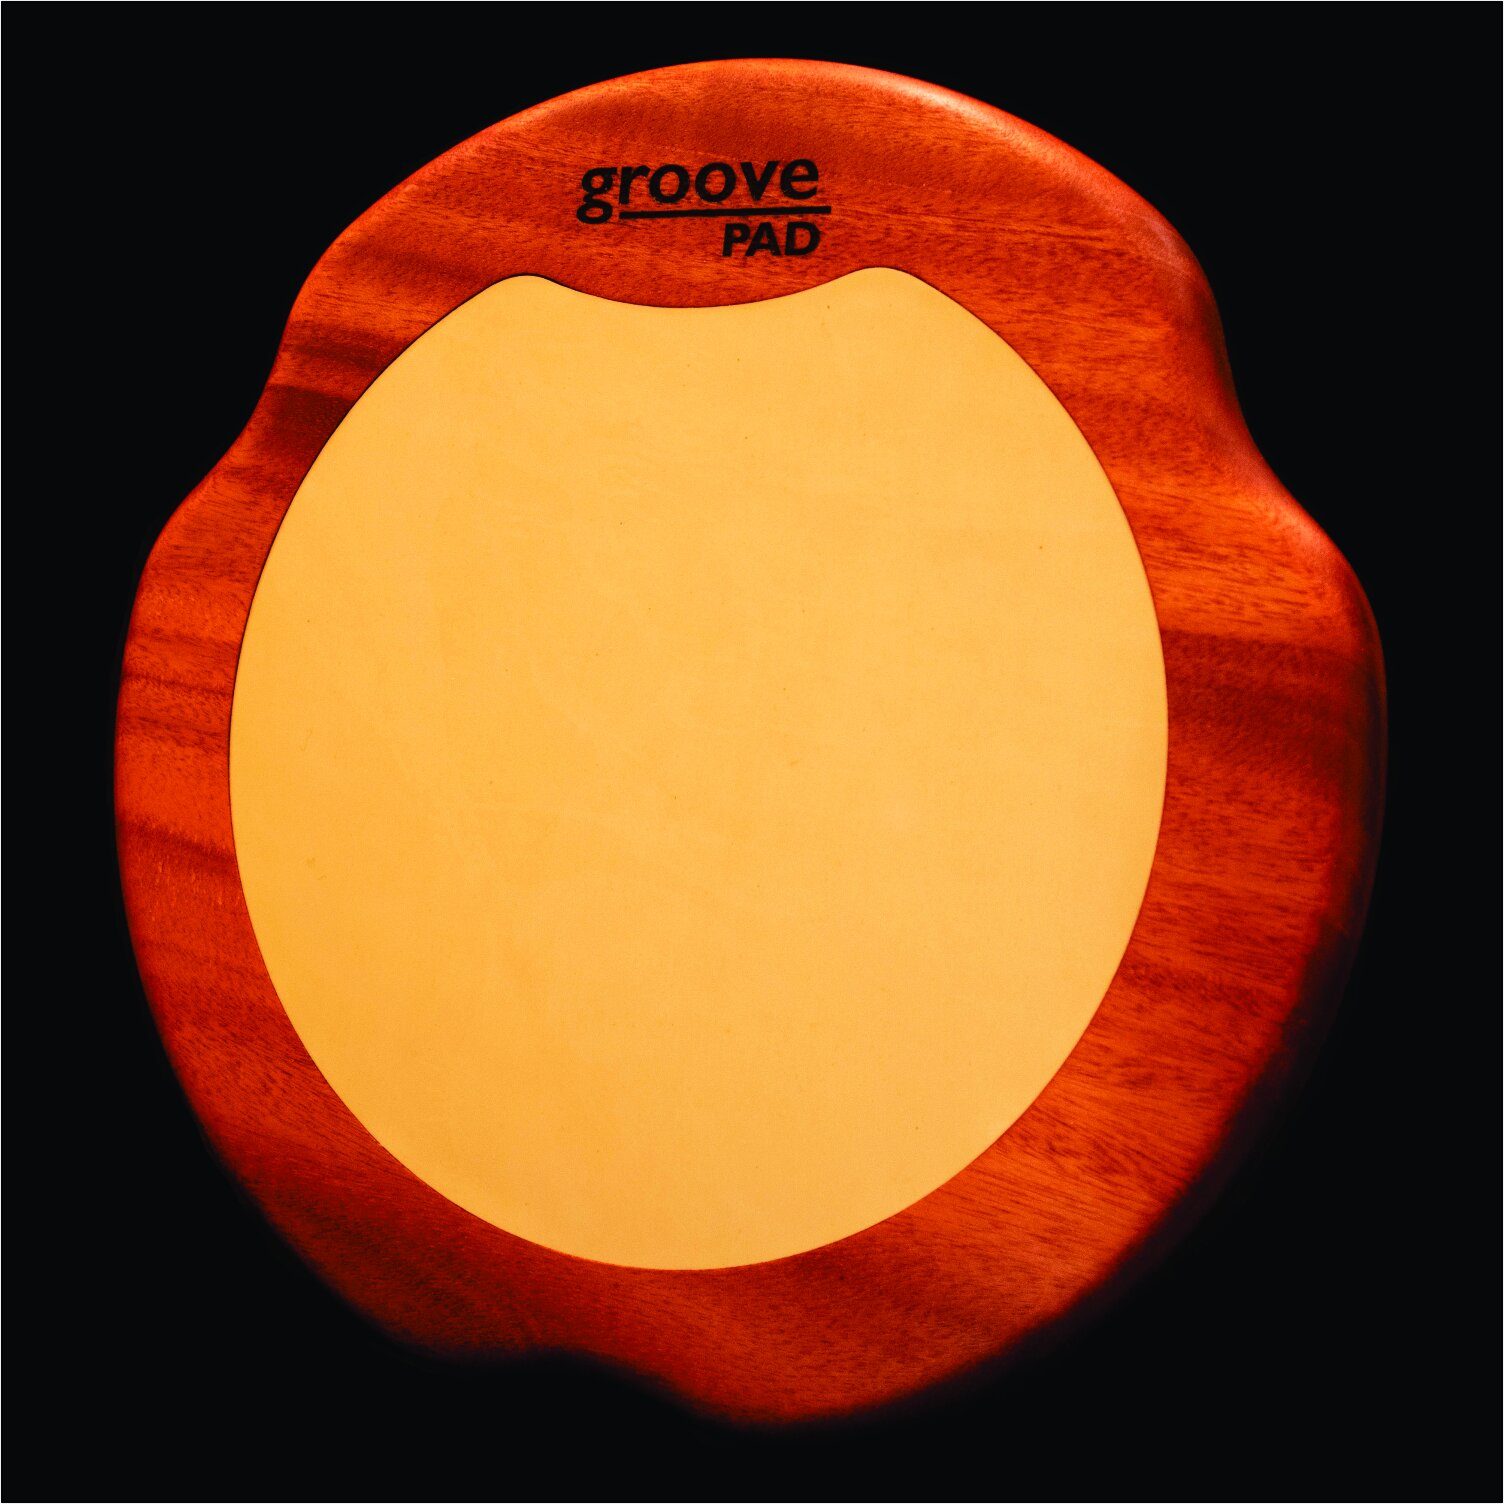 Patented Rollable Groovpad Glow in the Dark Super Quiet Practice pad designed by and for Drummers $22.99 USA Rubber North America Made Strength Building Bounce Great Backstage and Dark Rooms! 